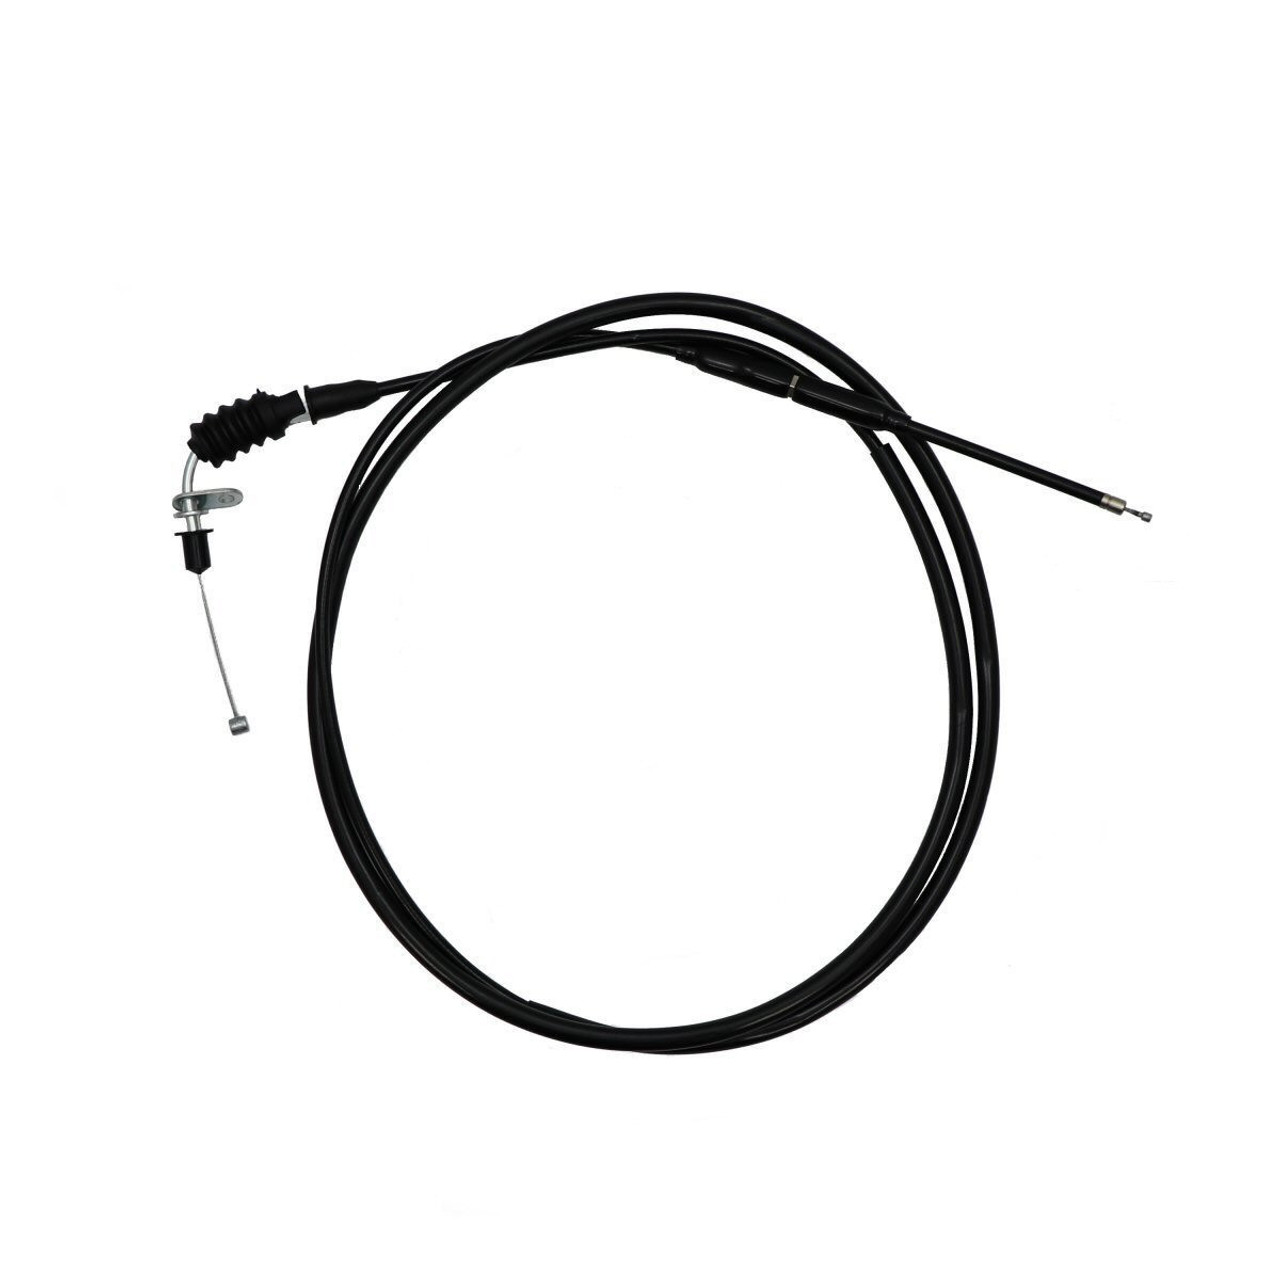 SSP-G 63.5" SCOOTER THROTTLE CABLE - FOR PWK CARBURETOR